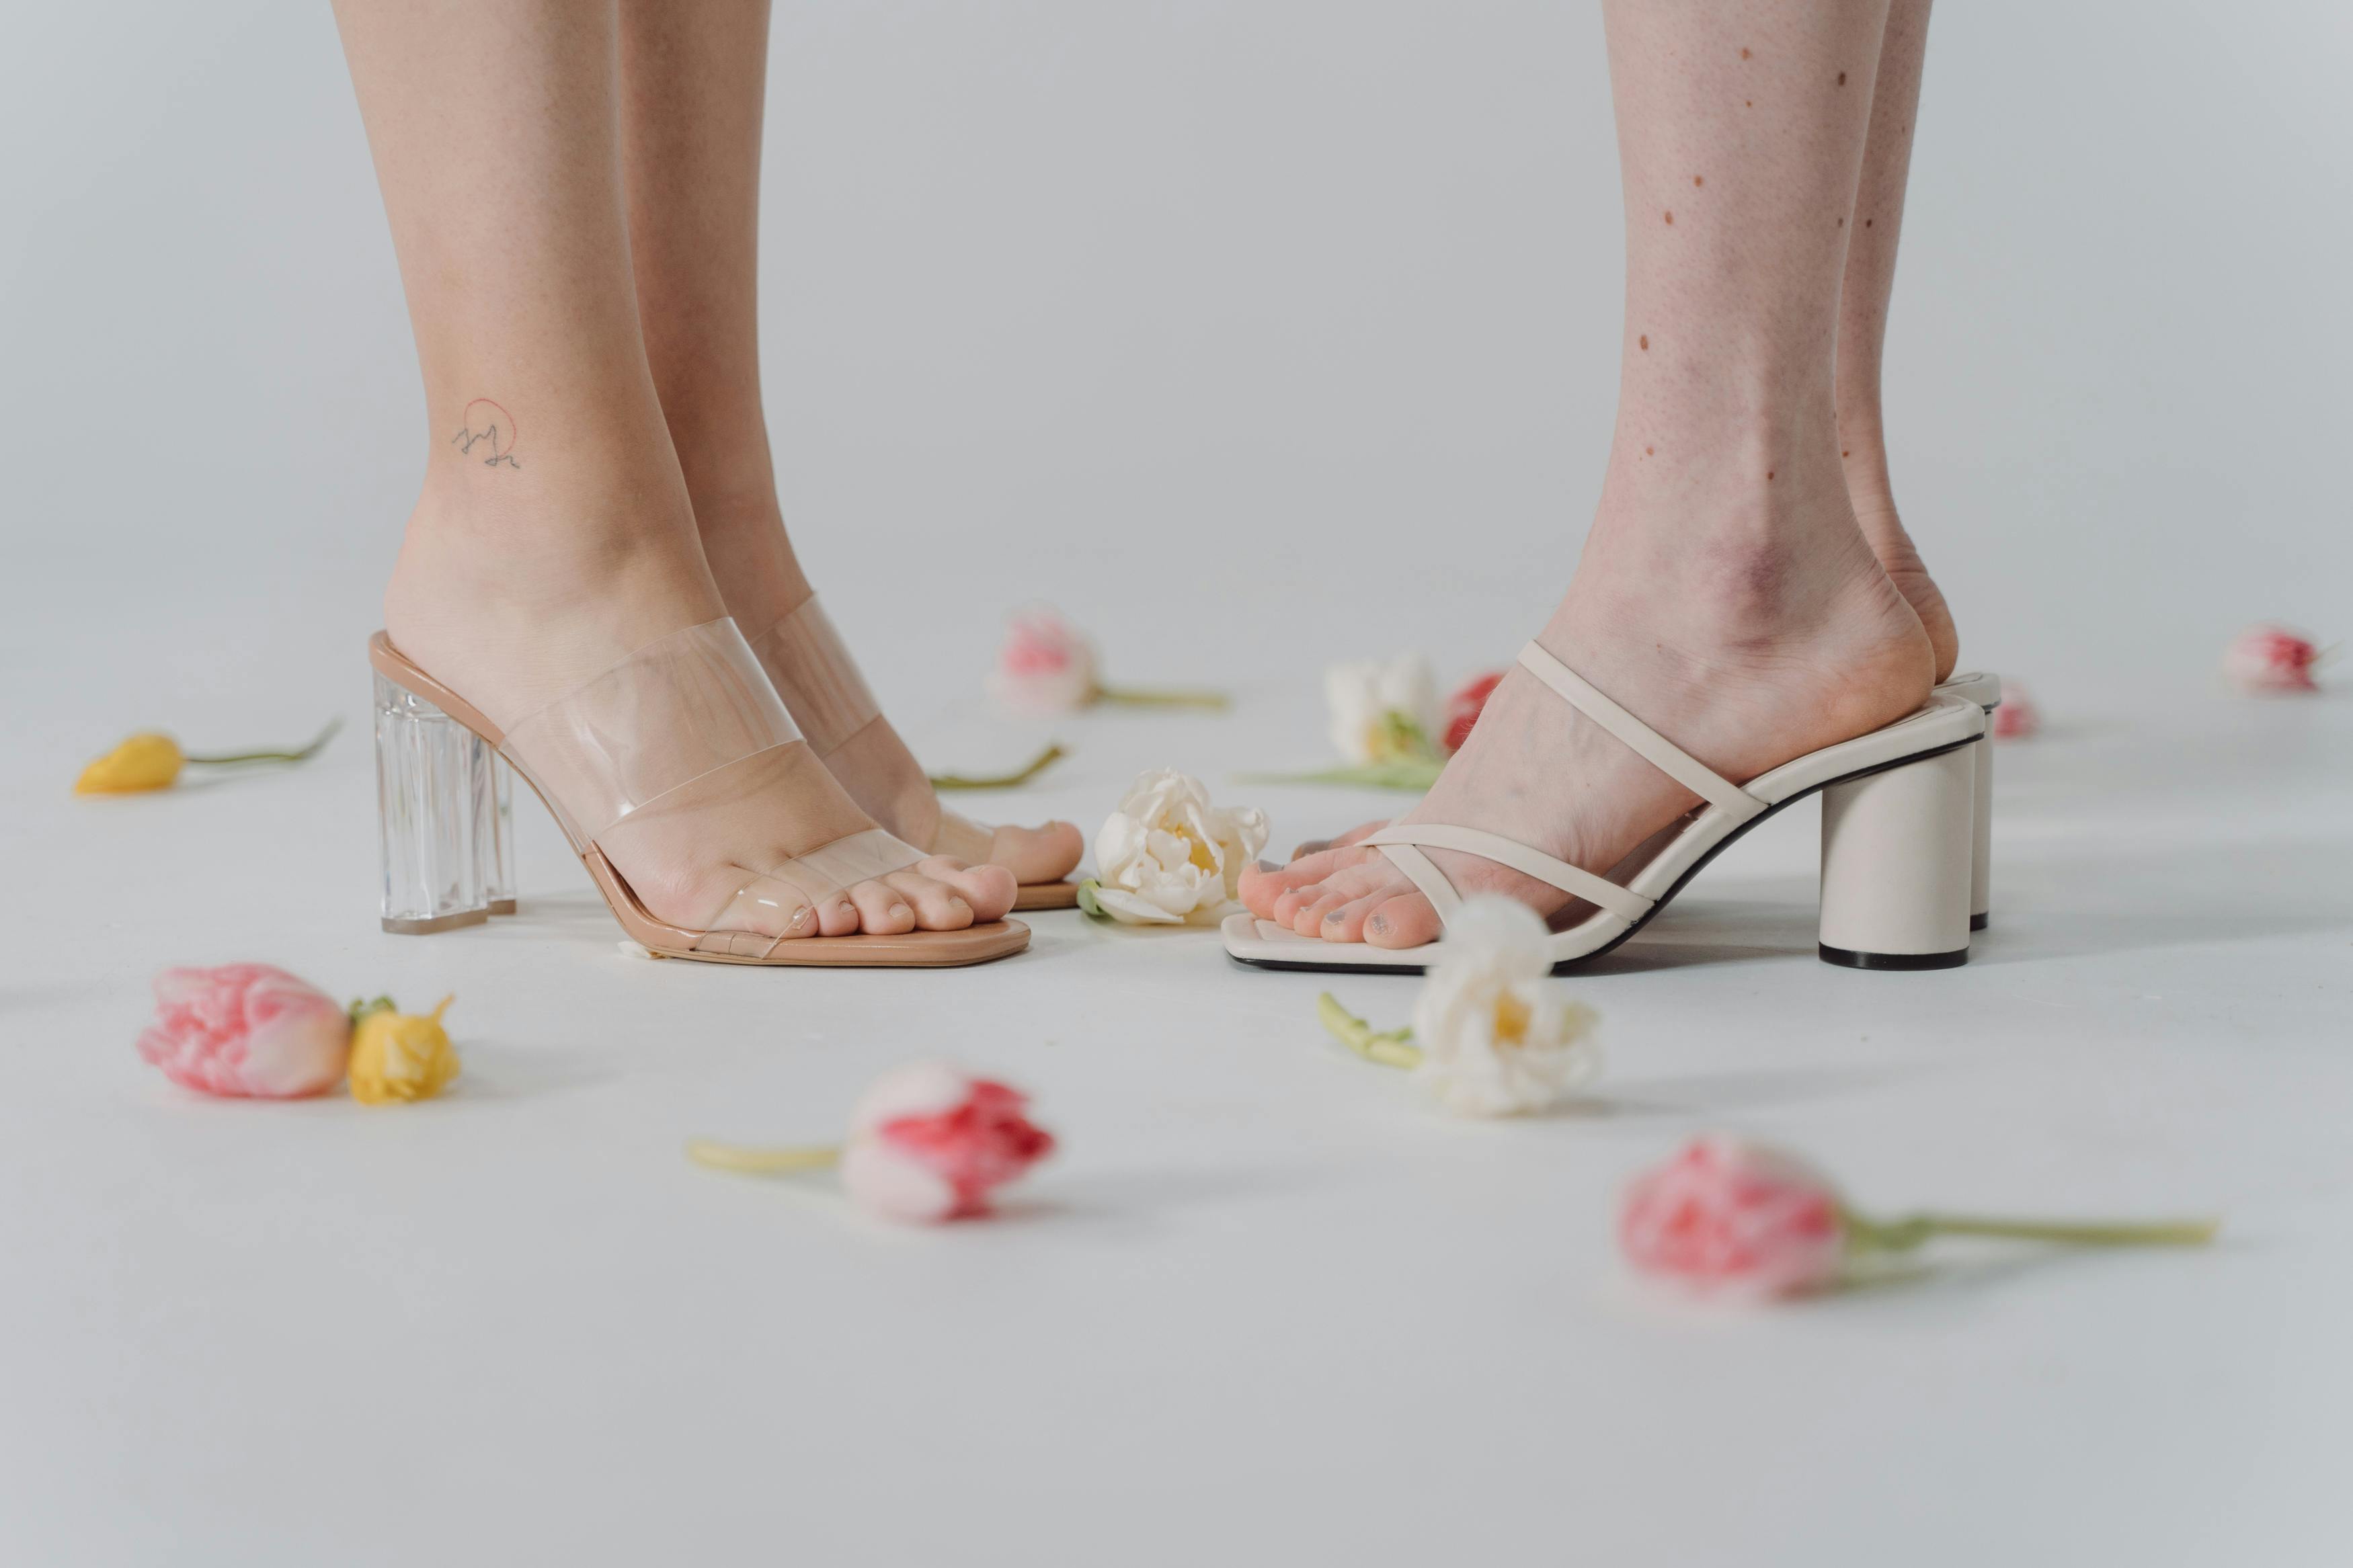 people wearing high heeled sandals surrounded with flowers